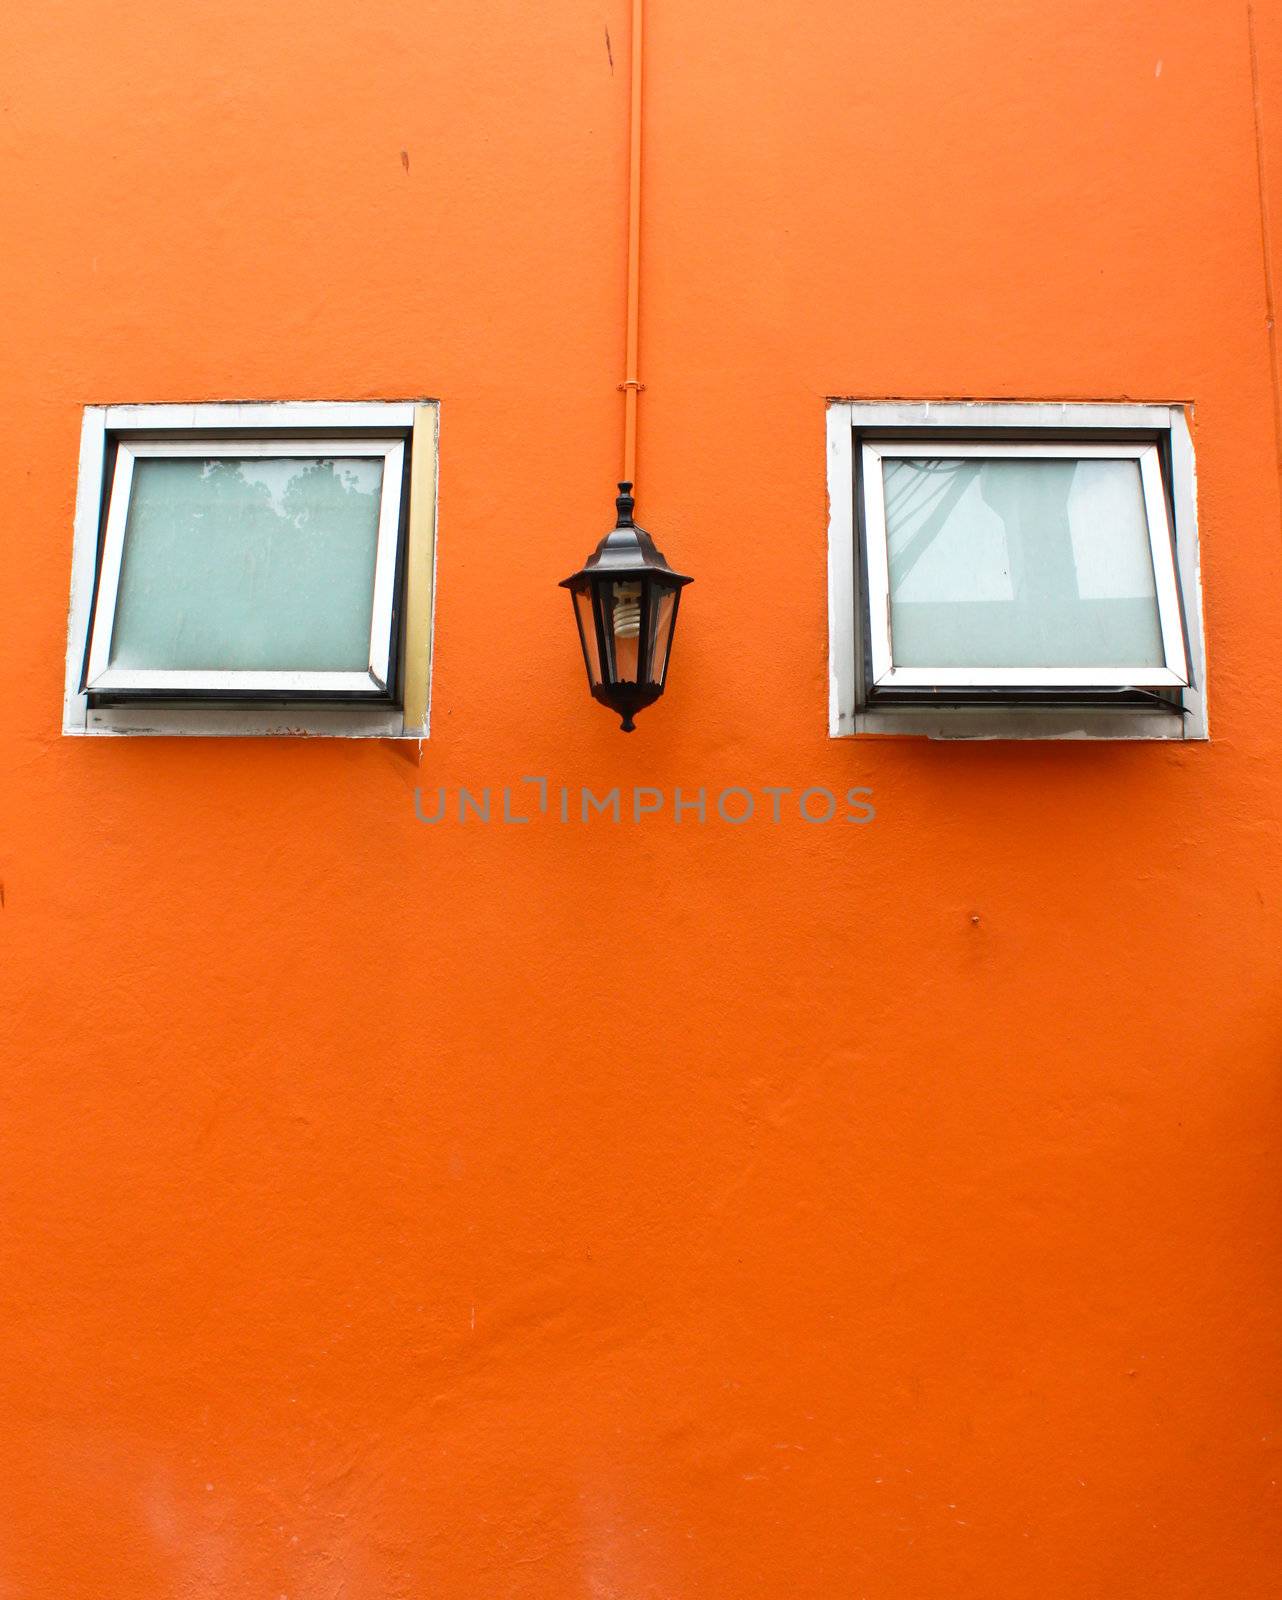 old lamp with windows on orange wall  by nuchylee